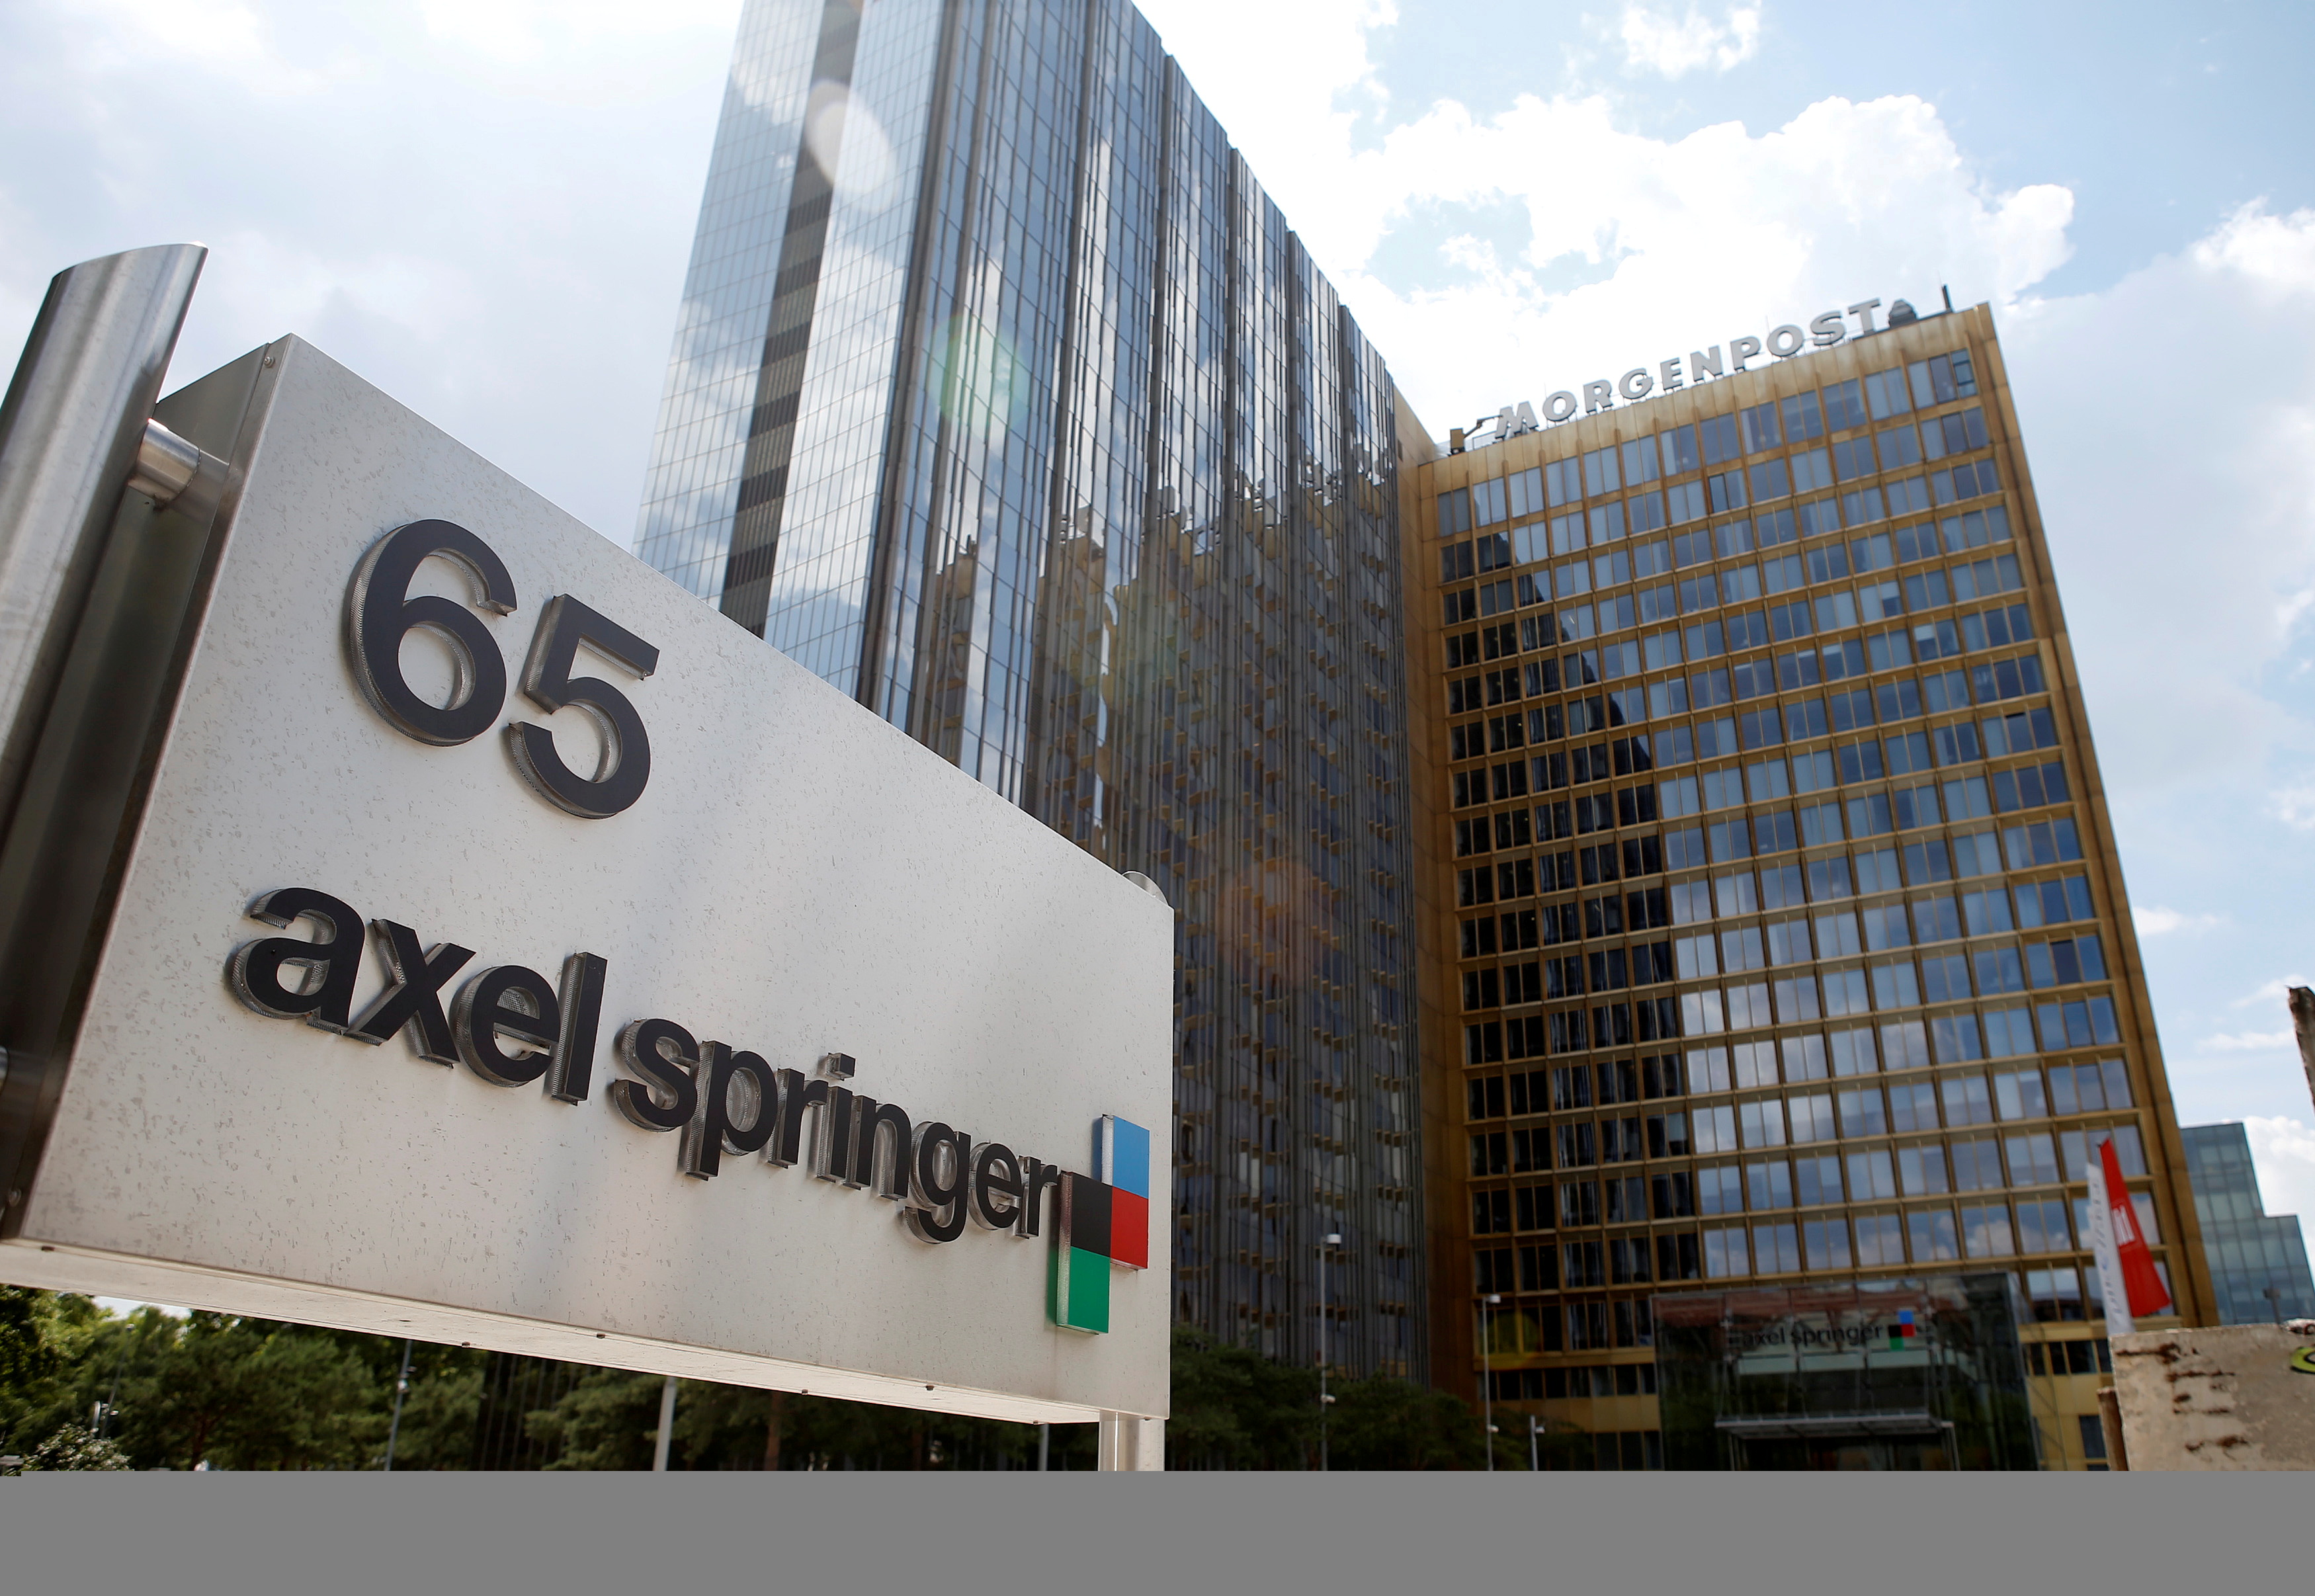 The logo of German publisher Axel Springer is pictured in front of the company's headquarters in Berlin